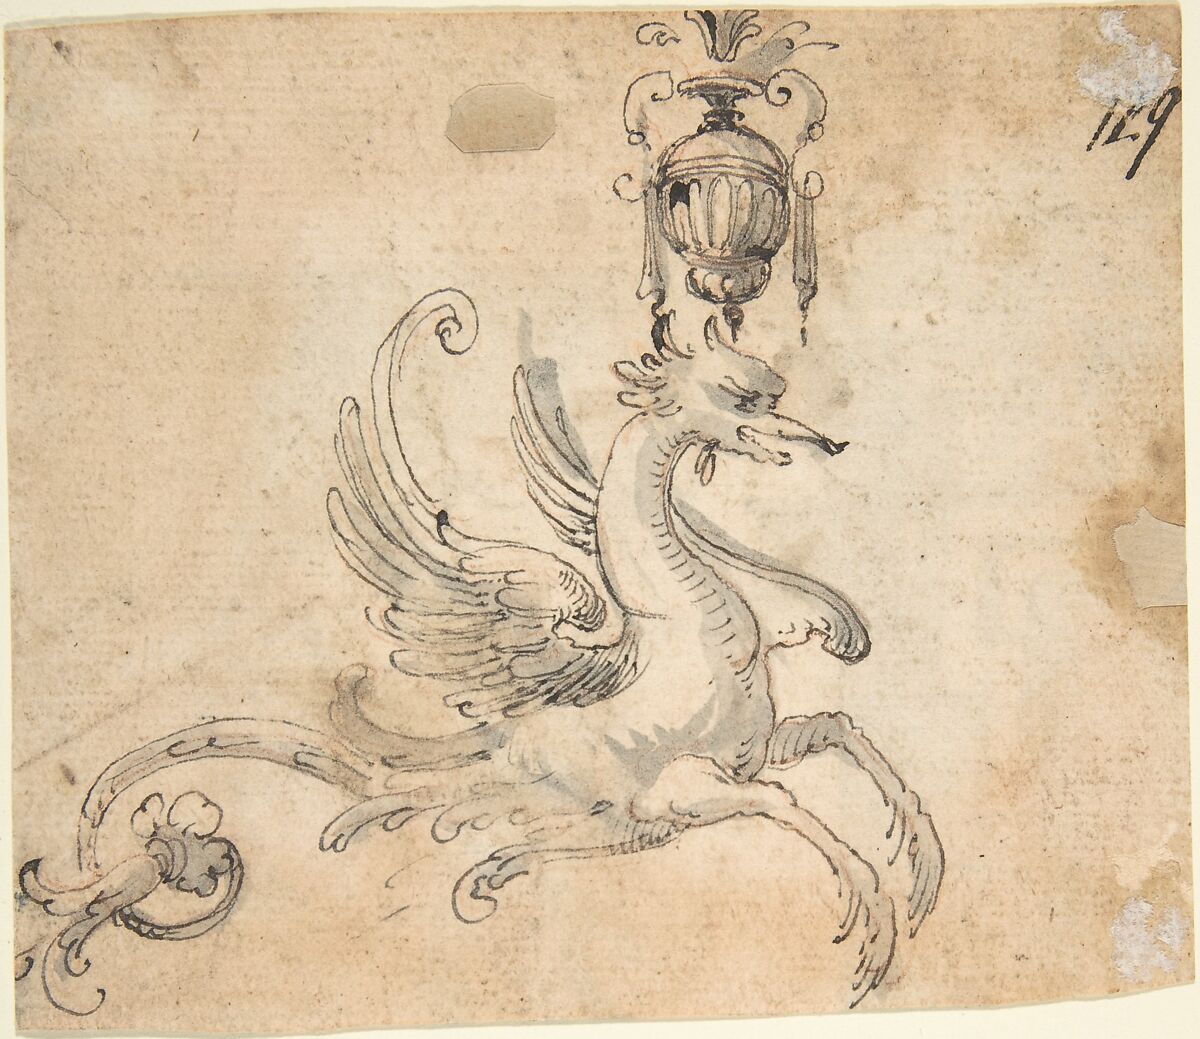 Winged Hippocamp supporting a Vase (recto); Figure Studies and Architectural Design (verso), Anonymous, Italian, 16th to early 17th century, Pen and brown ink, brush and brown wash, over red chalk (recto); pen and brown ink, brush and gray wash, over red chalk. 